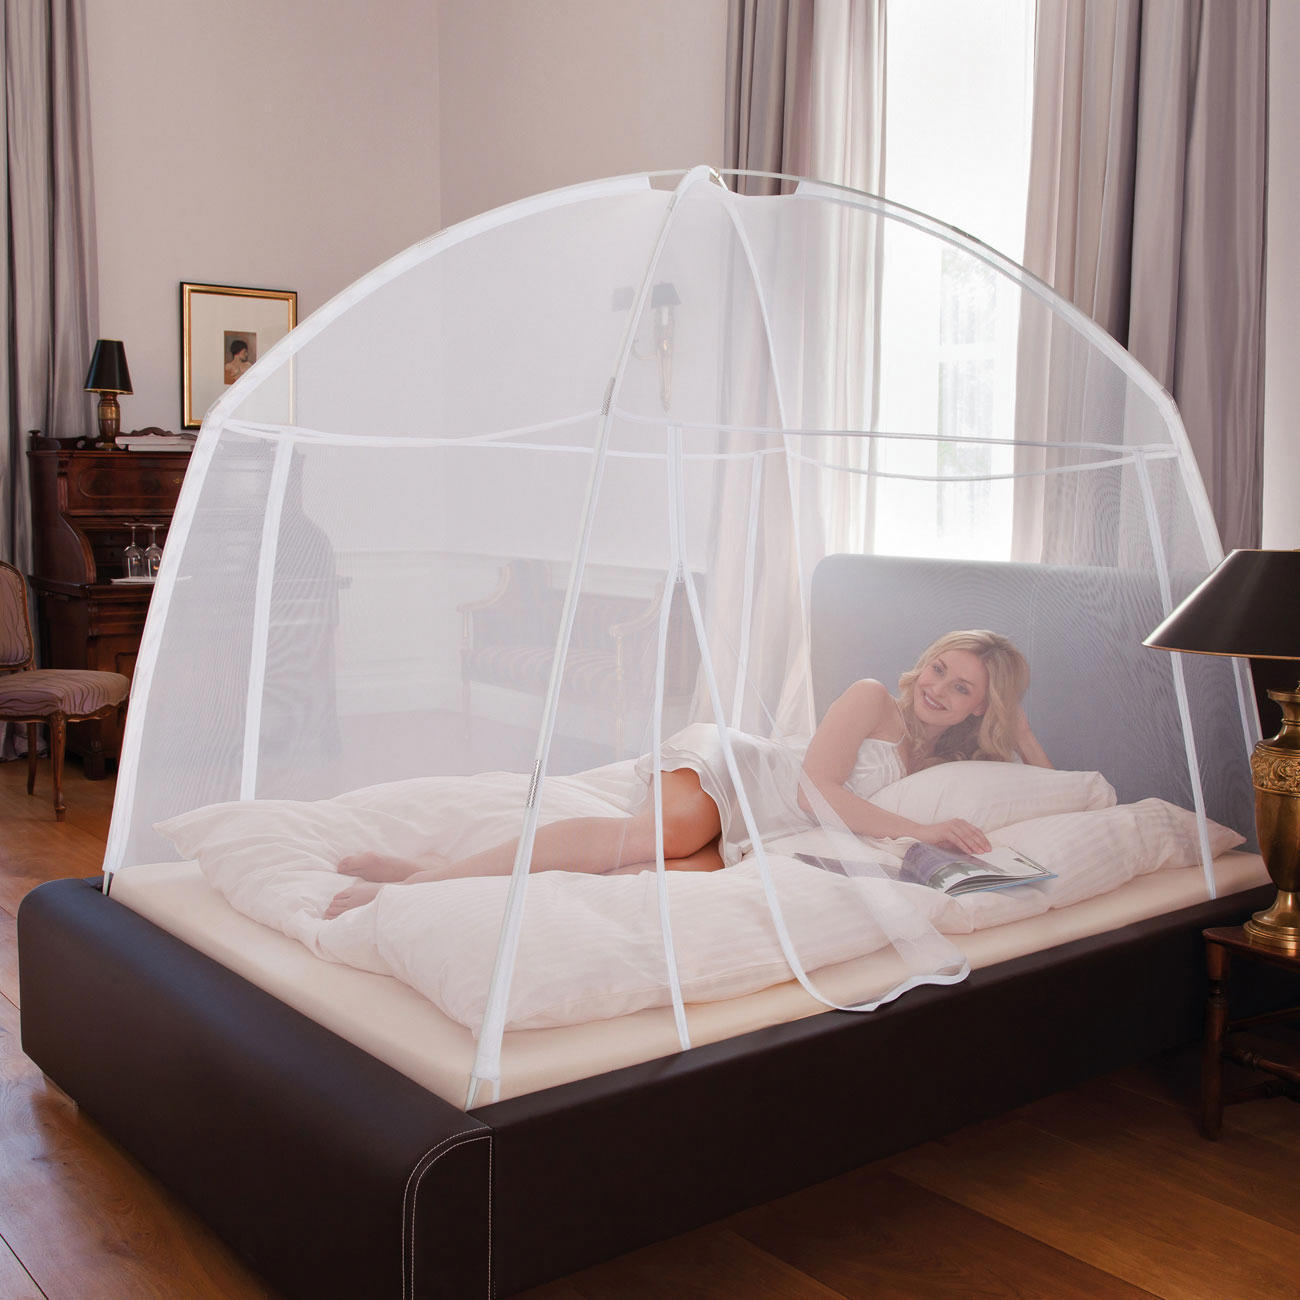 Portable Mosquito Net | 3-year product guarantee